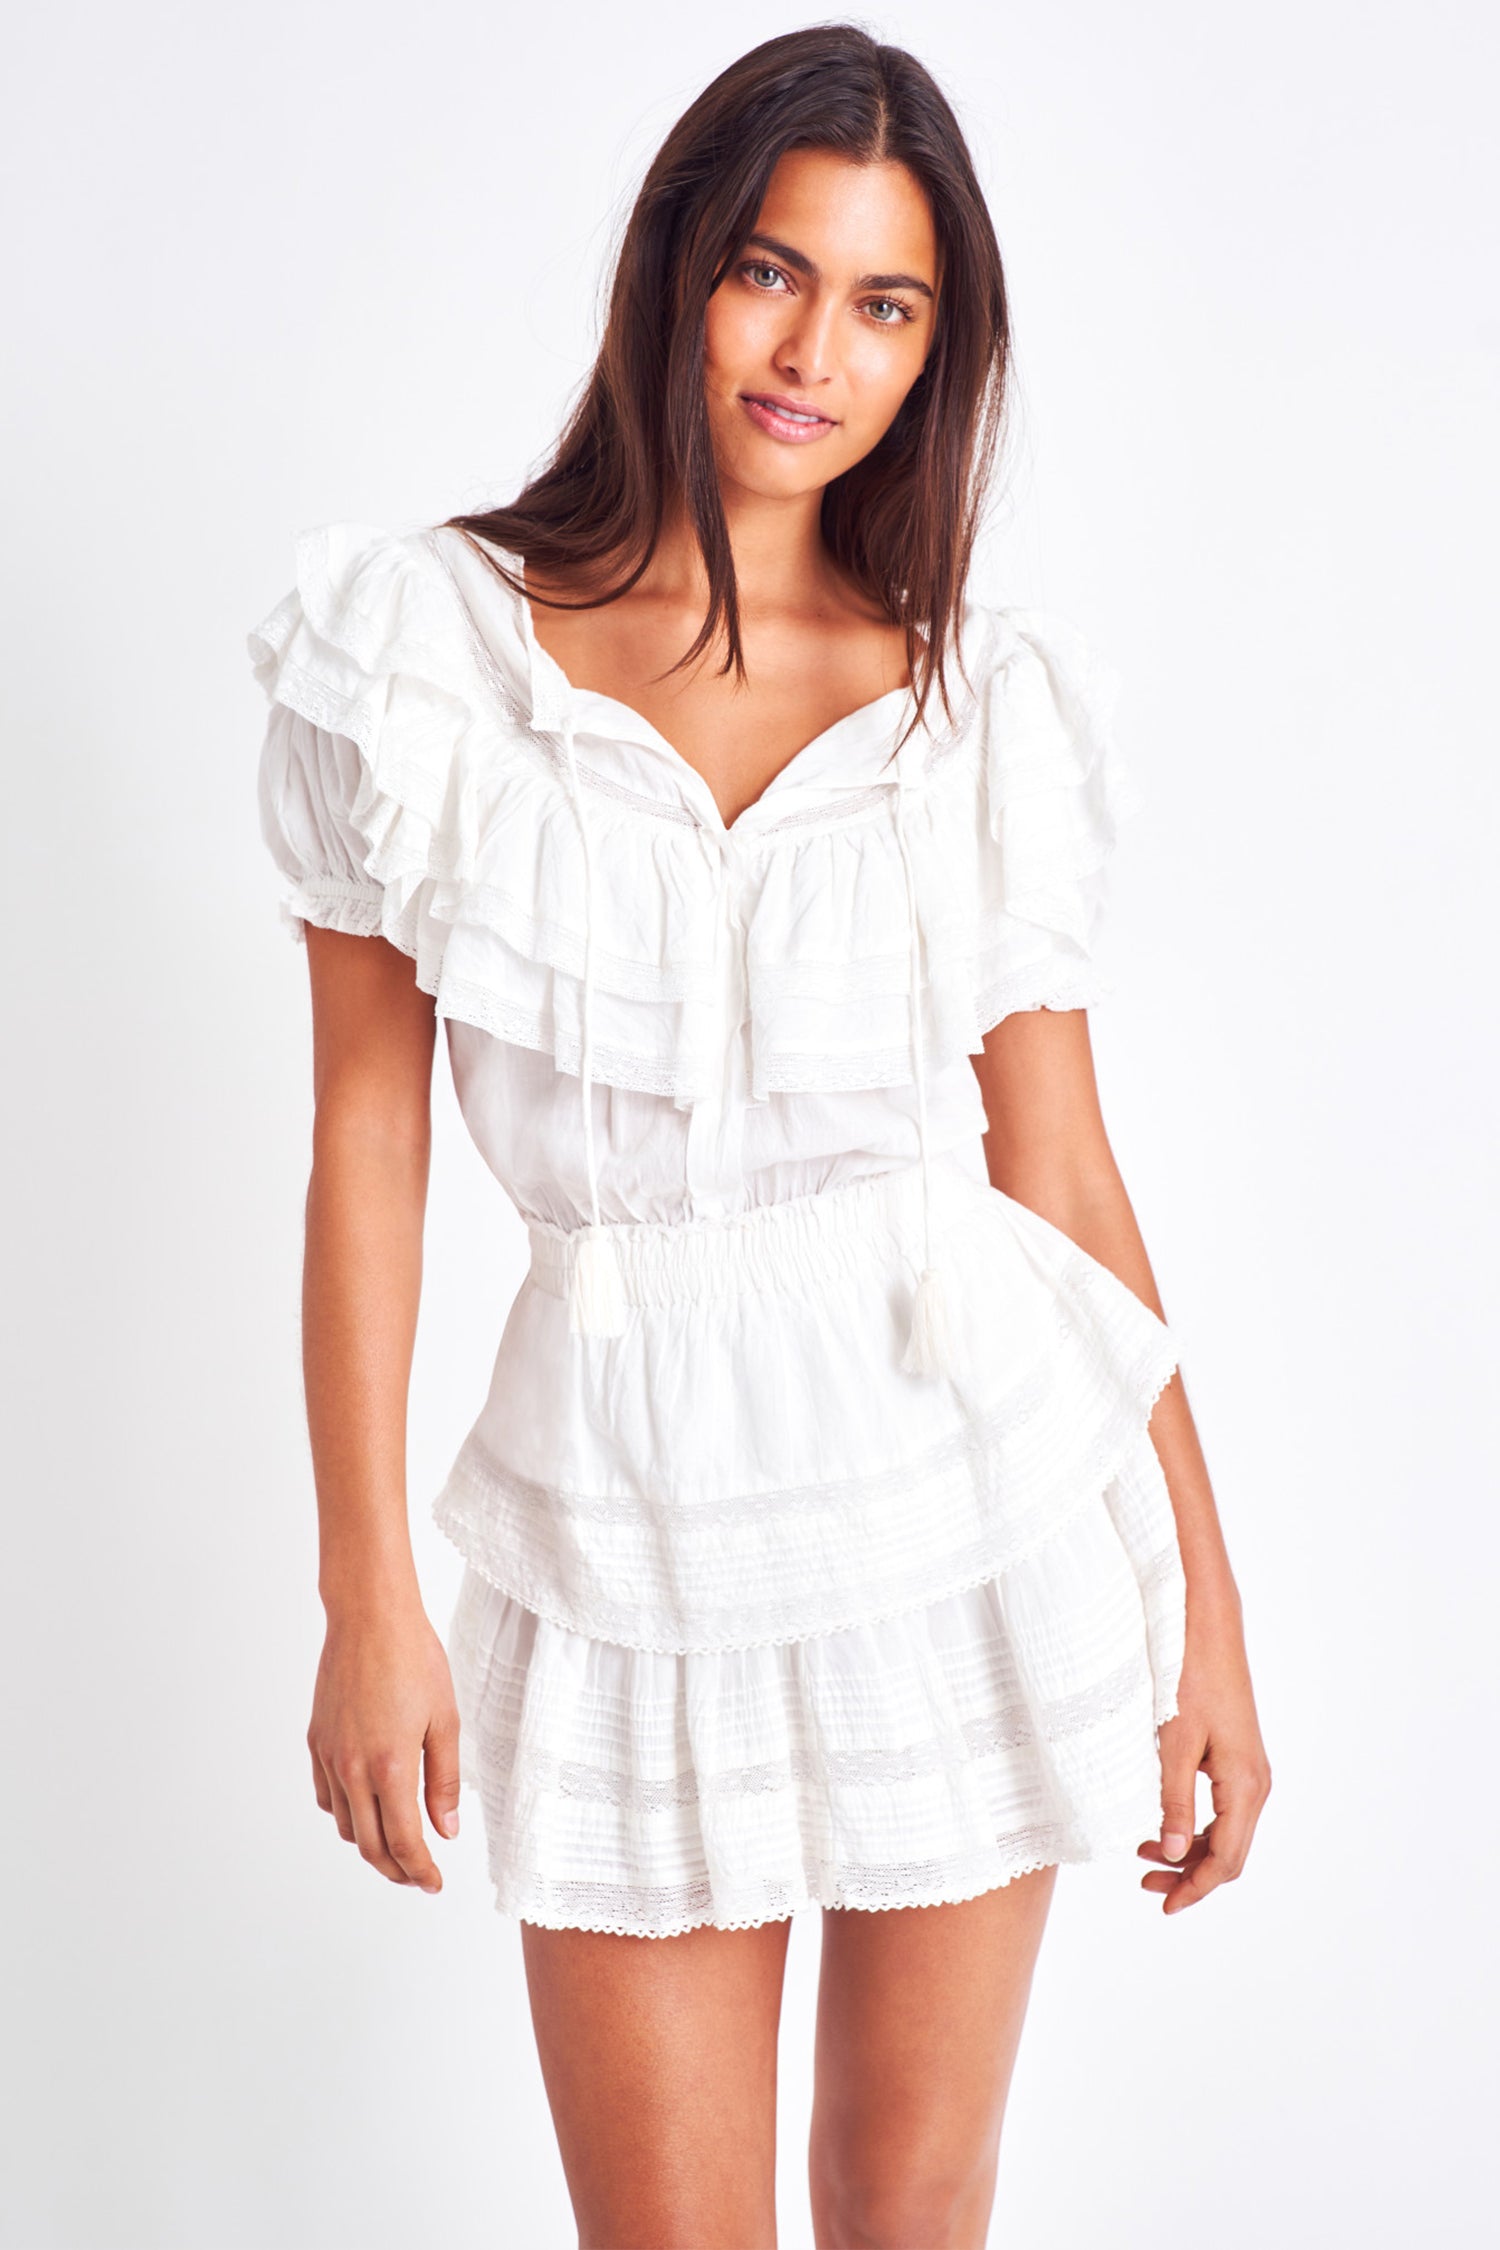 The Liv dress is a vintage inspired dress and features a puff sleeve and a double tiered yoke top. It has a ruffled mini skirt which brings in a feminine look along with front ties to finish the scoop neckline, and a cinched elastic waist. 